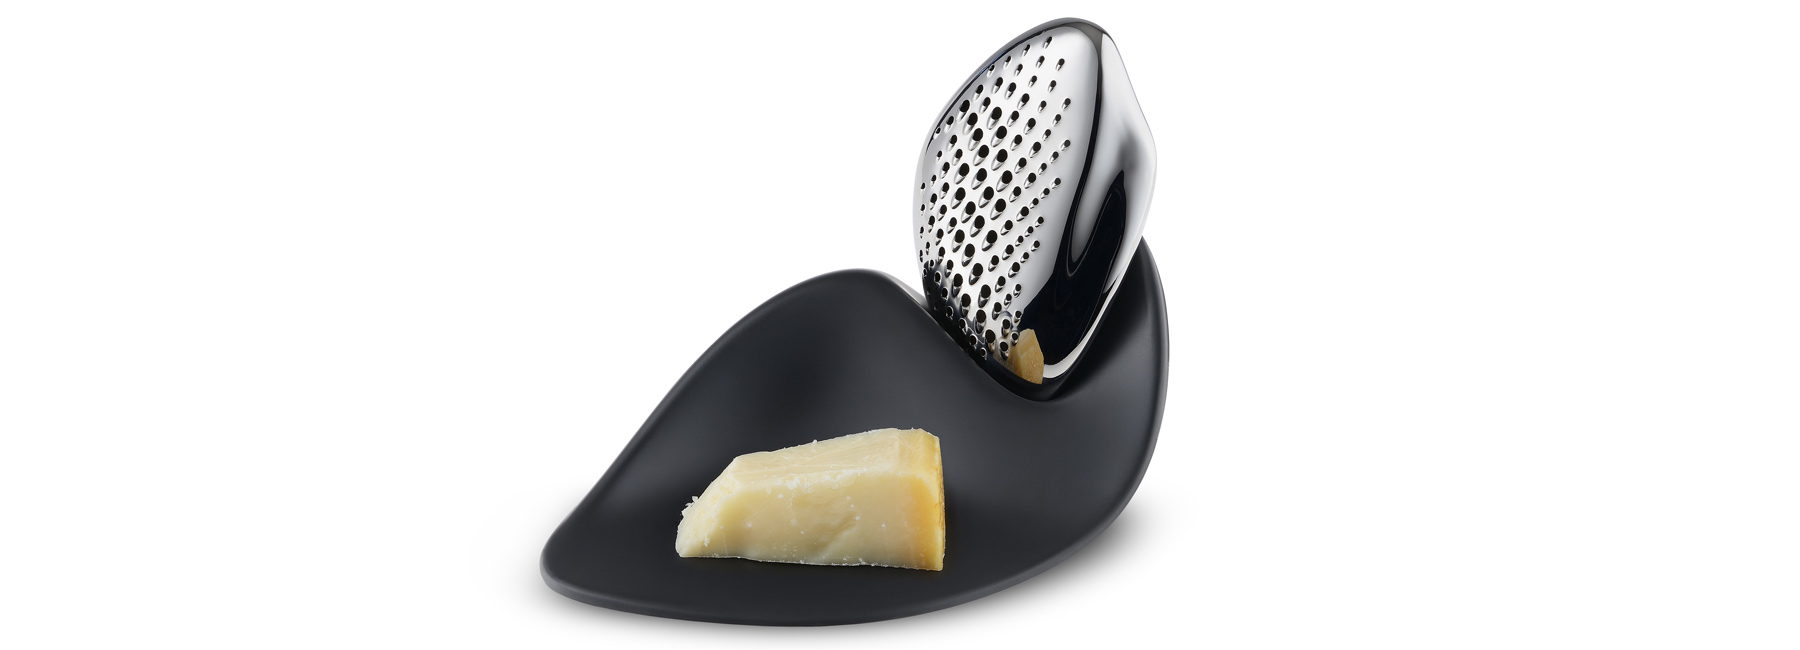 jeffontheroad-gift-ideas-foodie-alessi-zaha-hadid-forma-cheese-grater